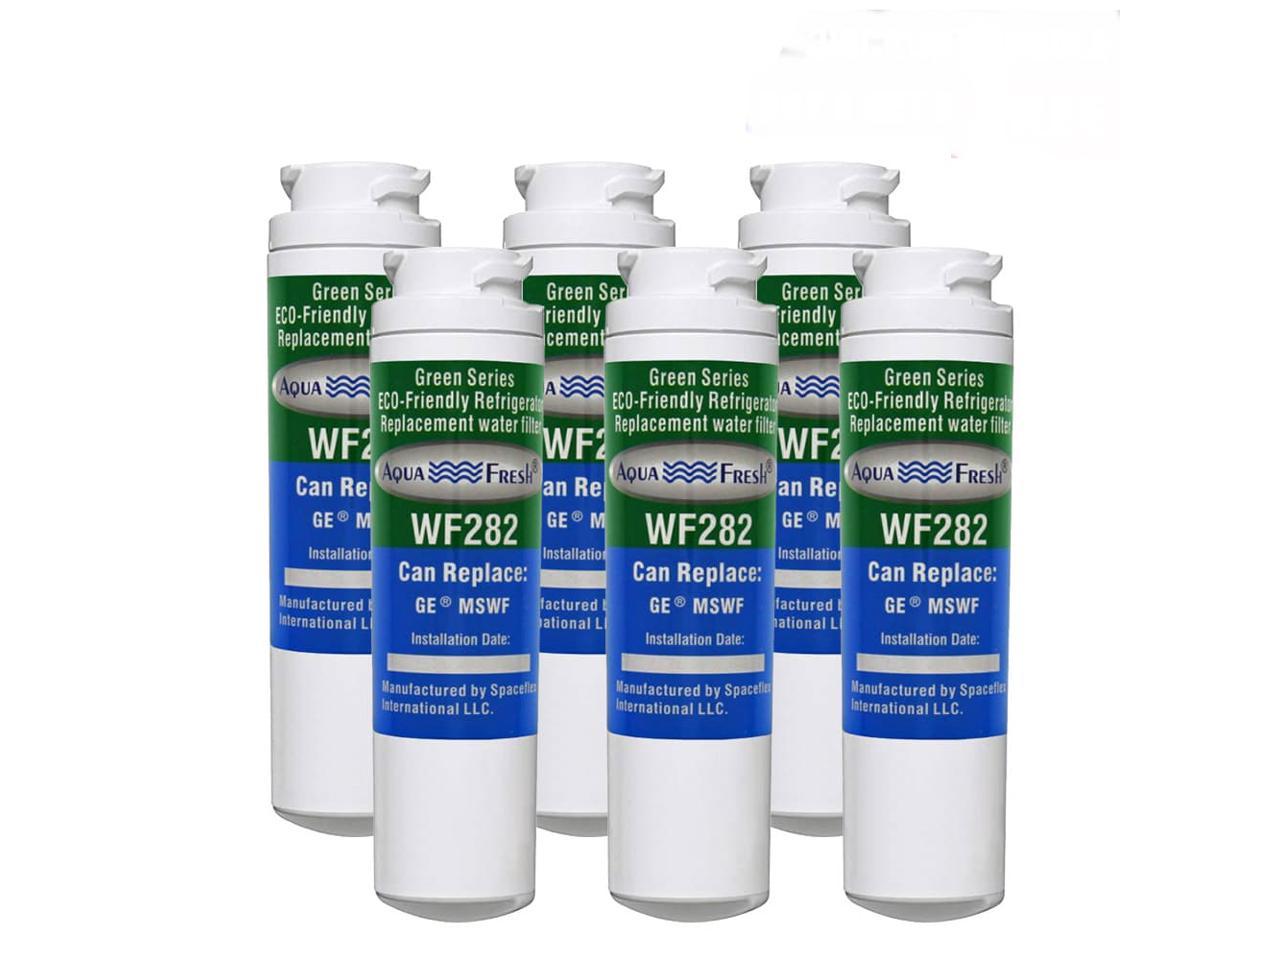 Replacement Water Filter For GE GXSTQR Refrigerator Water Filter 9 Pack 